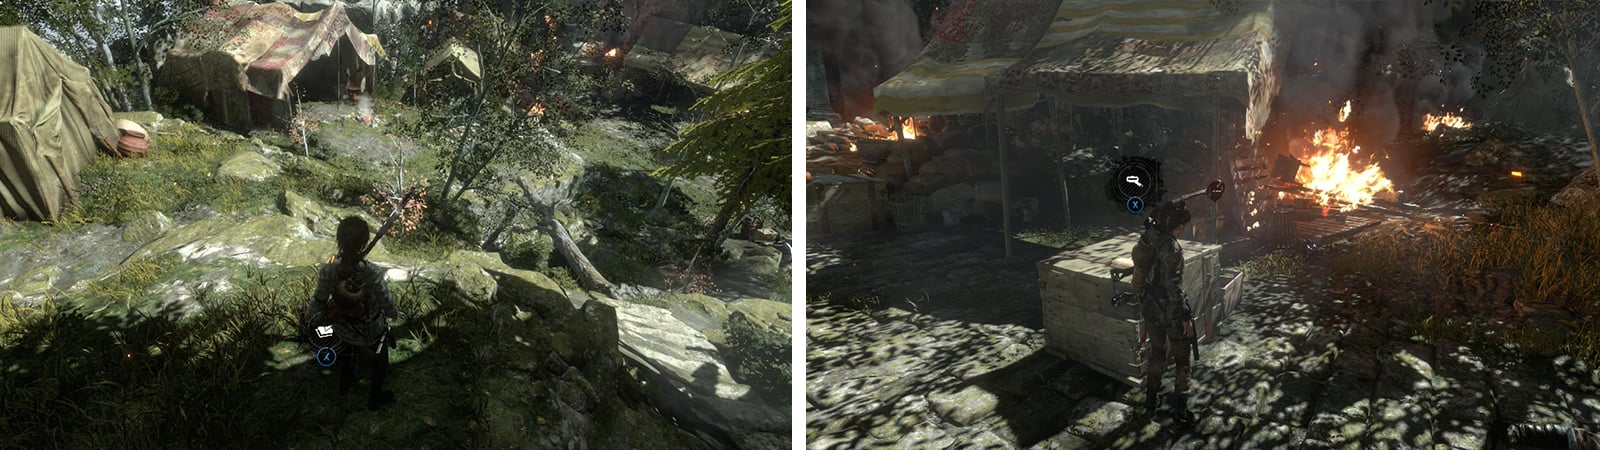 Before enetering town grab Survival Cache 01 (left). Opposite the Base Camp you'll find Document 02 (right).